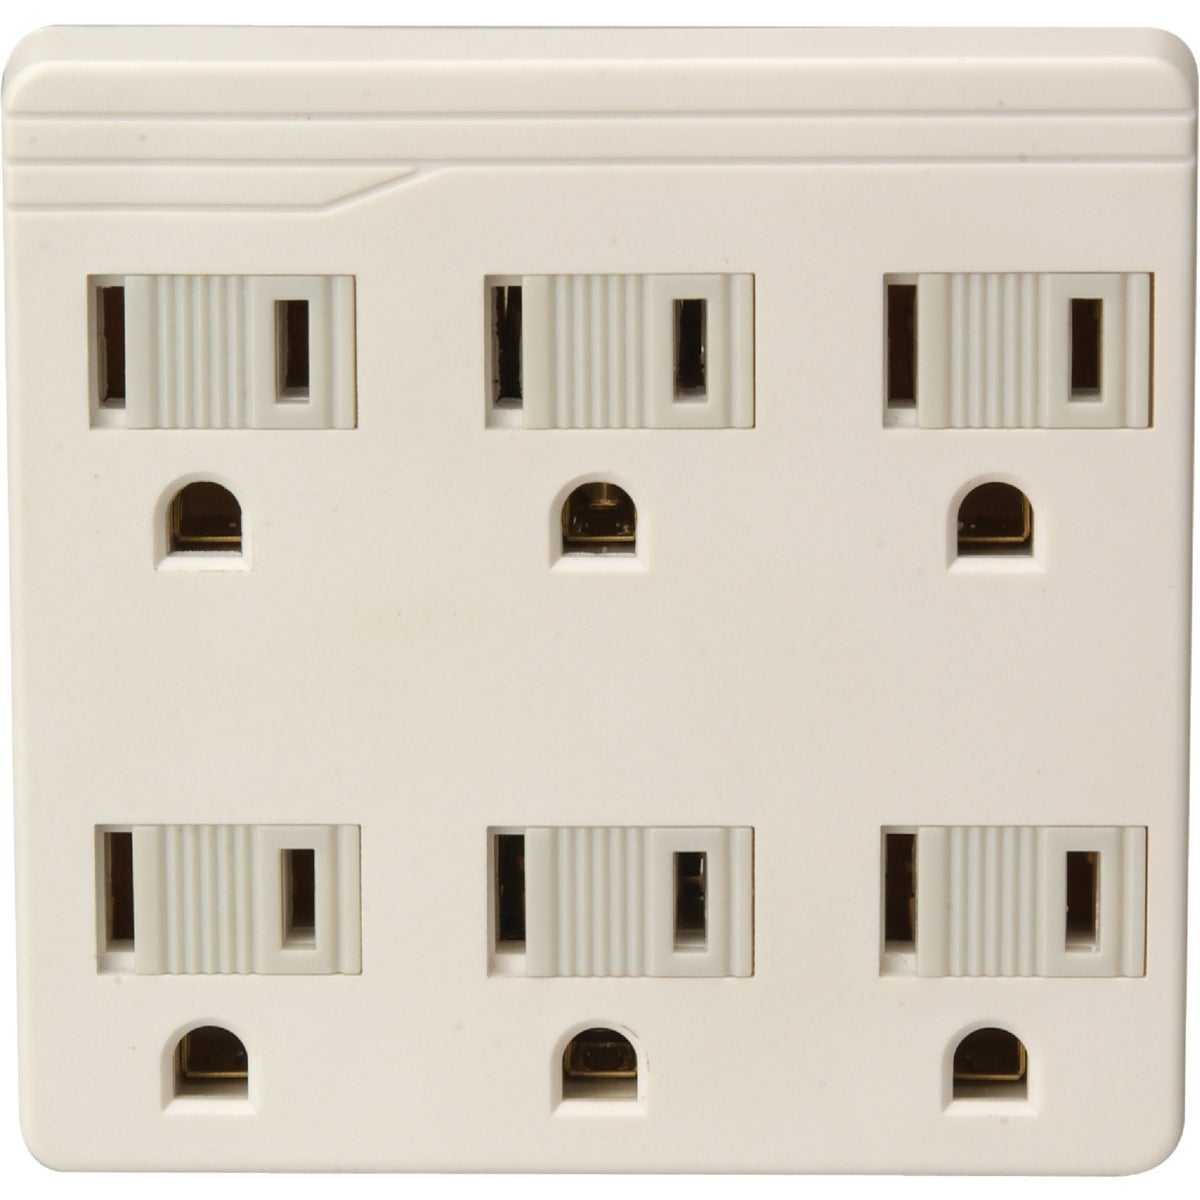 Item 525286, Wall tap outlet includes sliding safety covers and converts 2 outlets to 6 